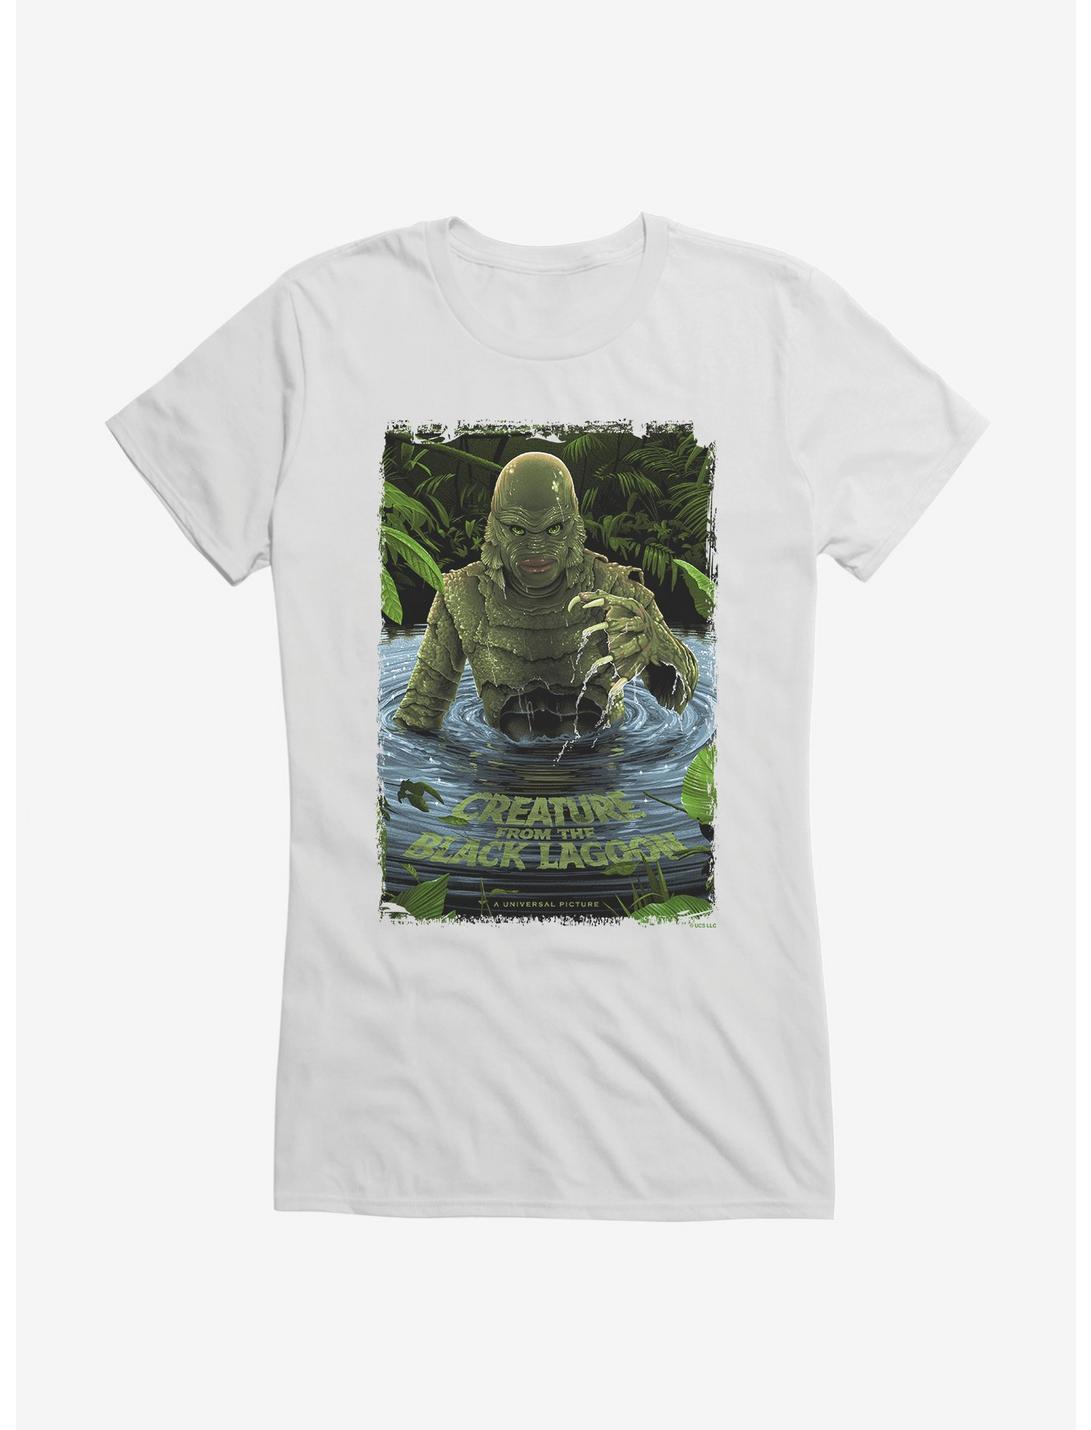 Creature From The Black Lagoon Original Horror Show Movie Poster Girls T-Shirt, , hi-res